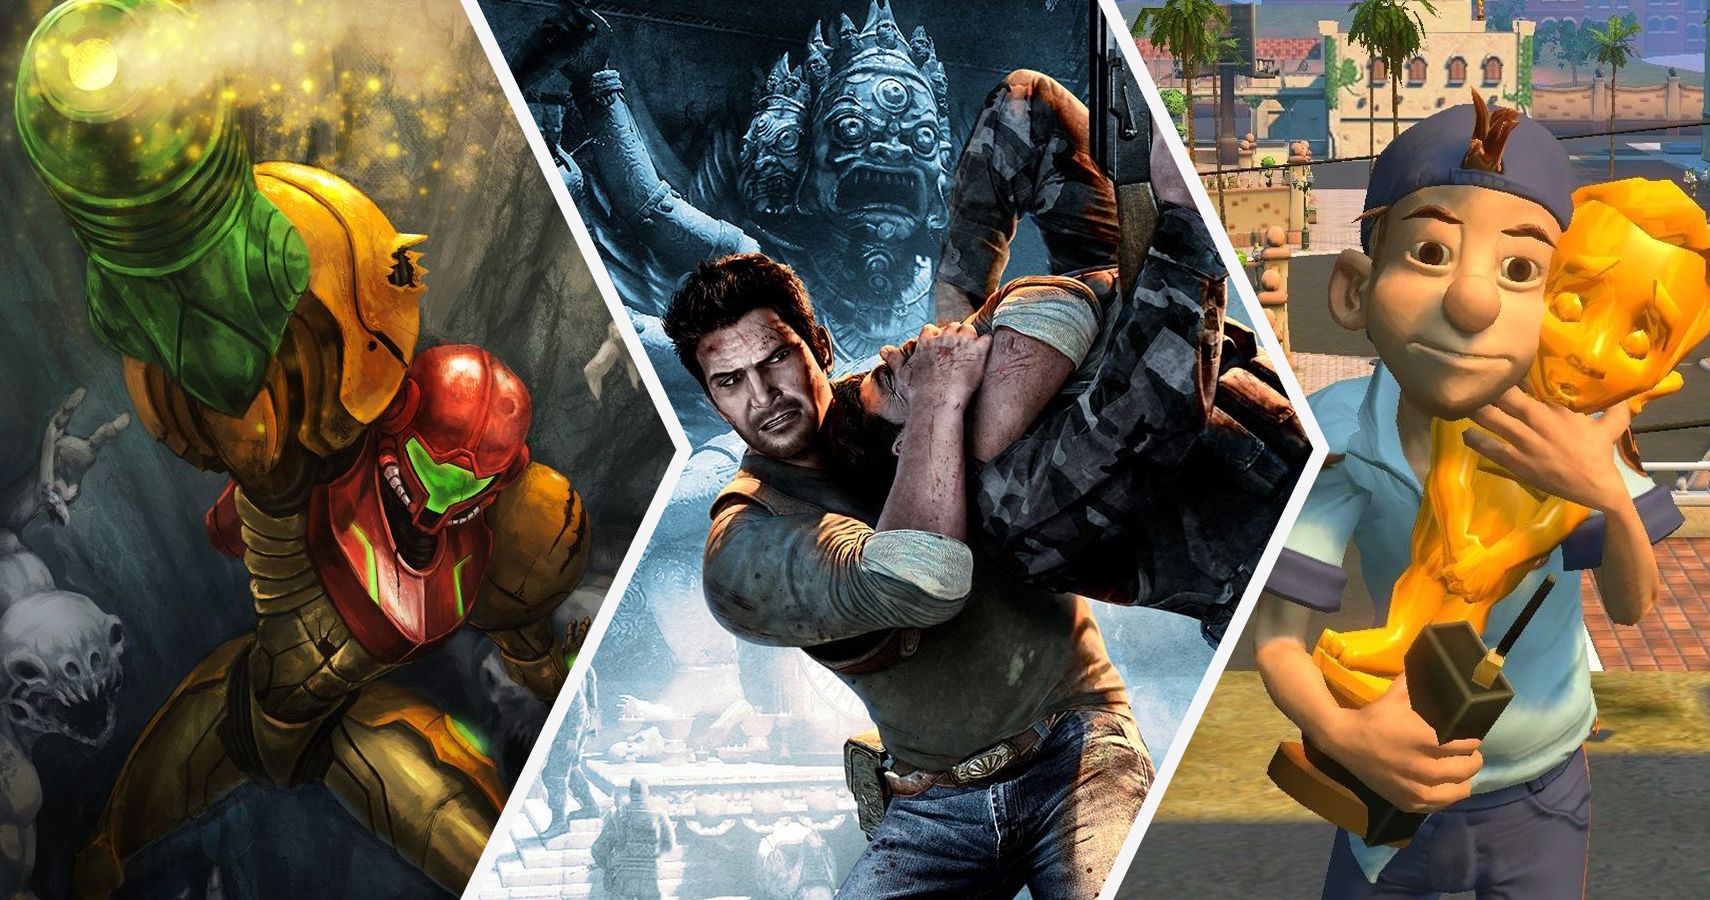 The Best Year in Gaming History, According to Metacritic